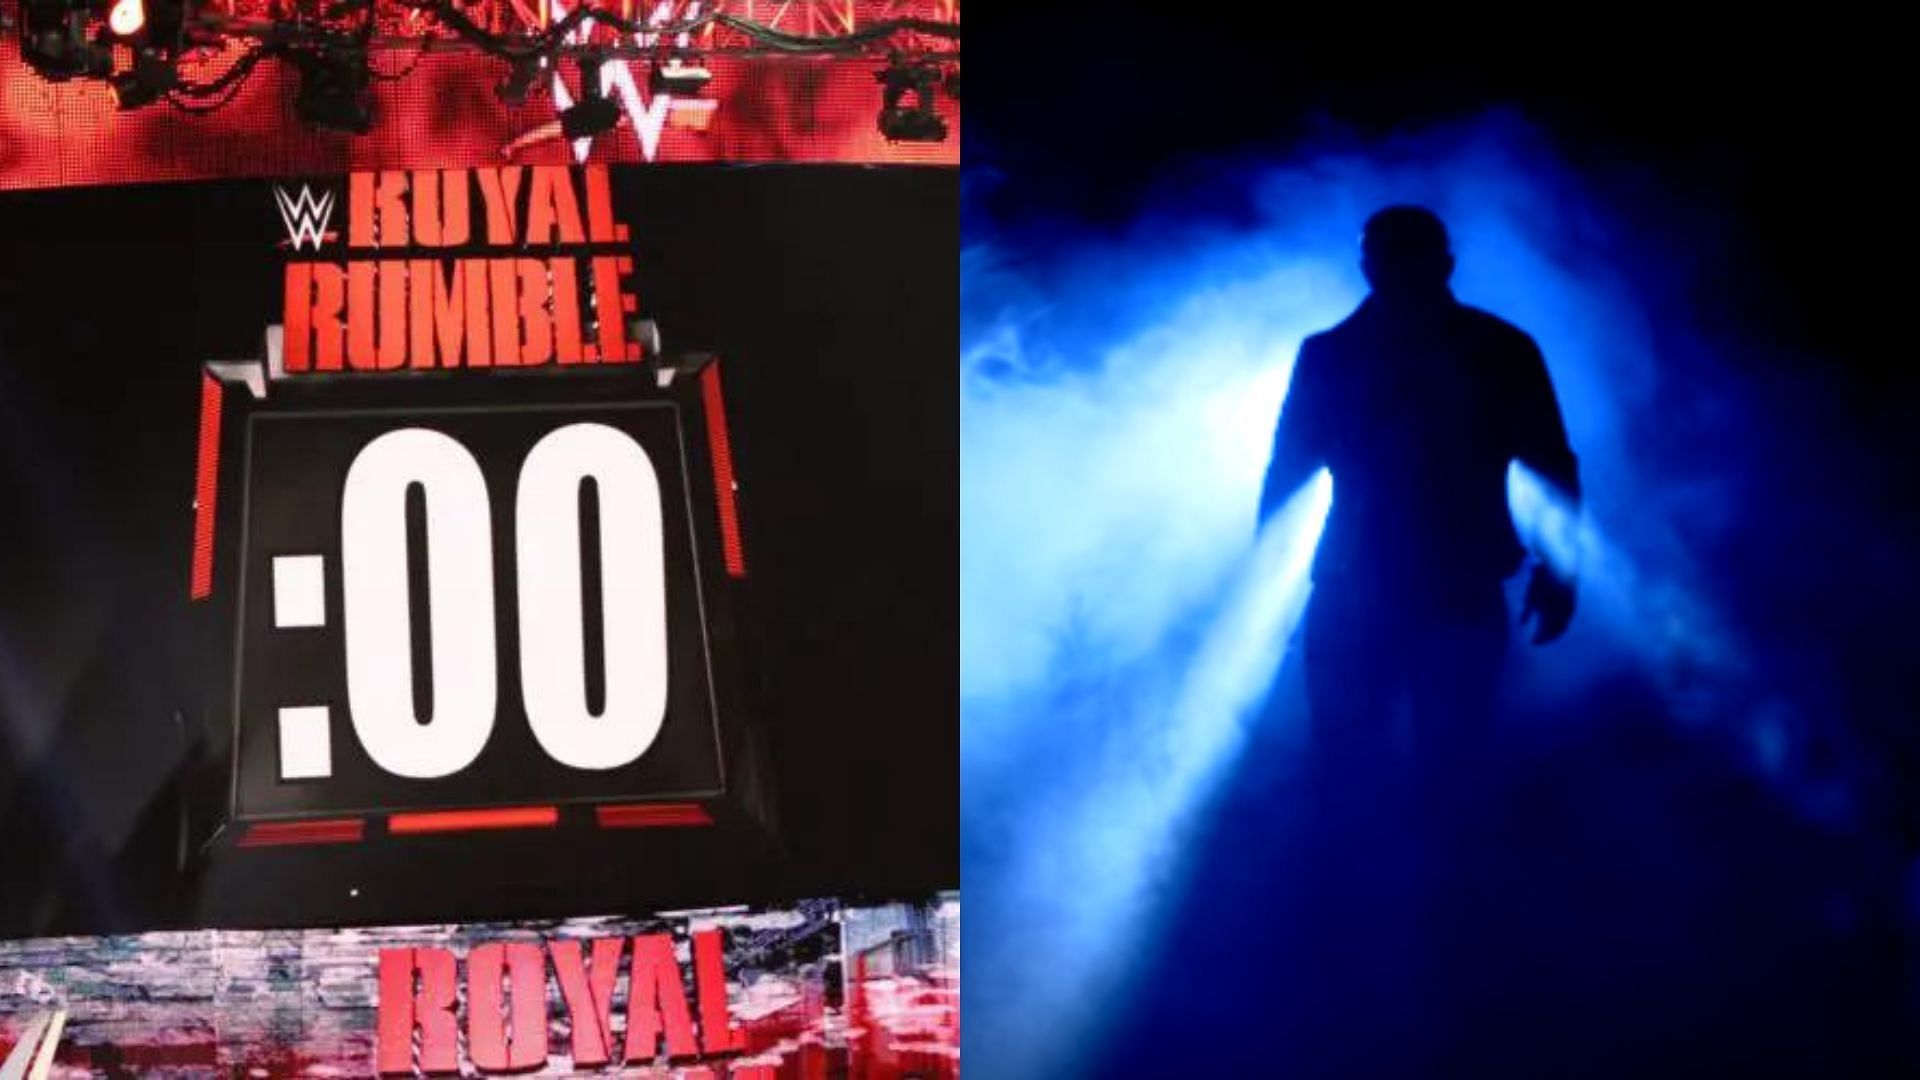 A legend has opened up about a crazy Royal Rumble finish.